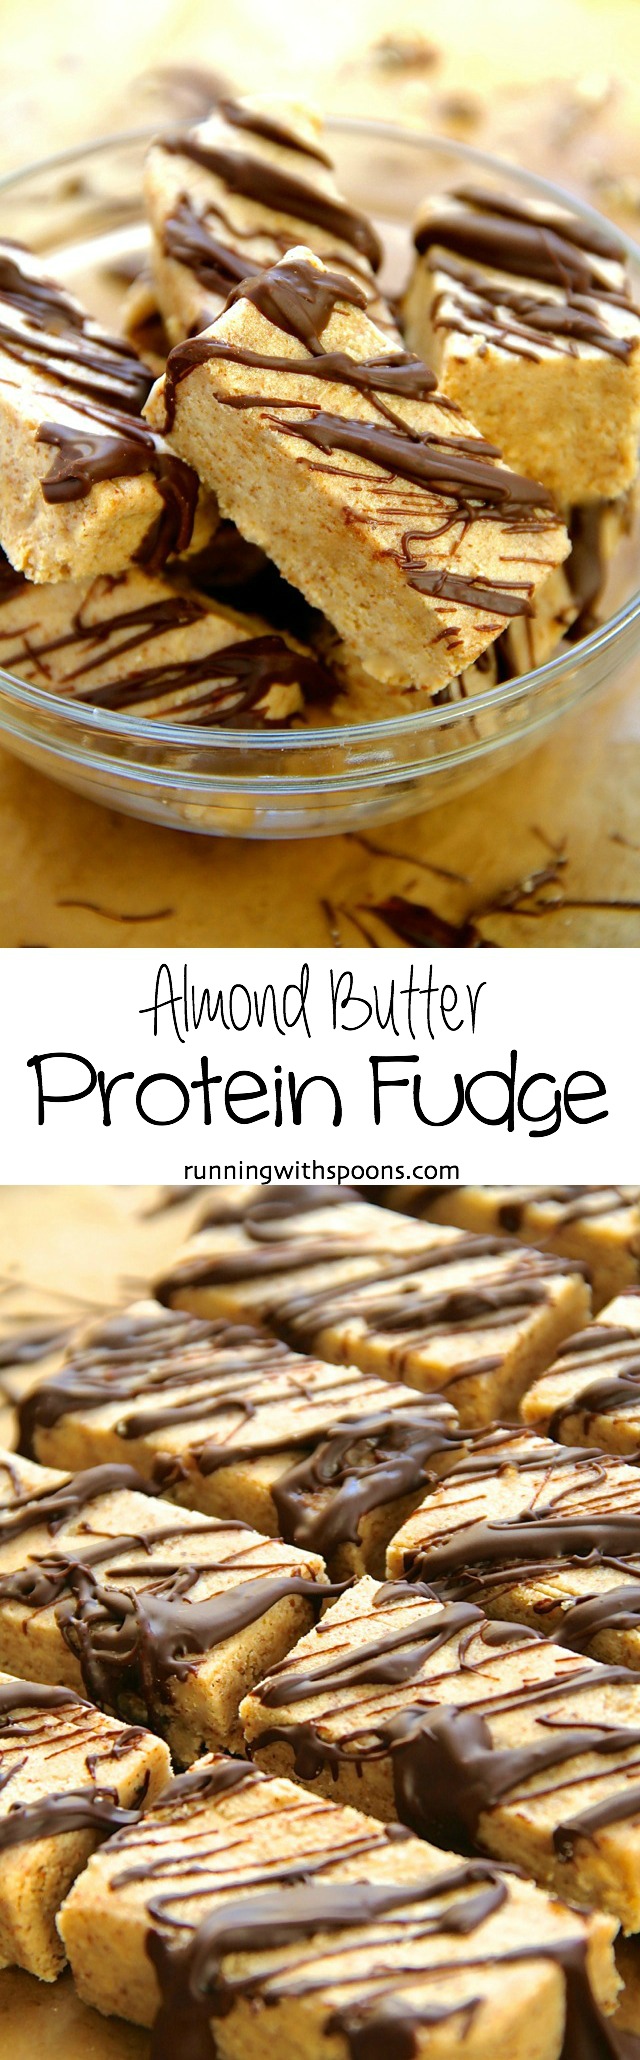 Almond Butter Protein Fudge -- Naturally sweetened 5-ingredient fudge that packs a decent dose of protein! || runningwithspoons.com #glutenfree #healthy